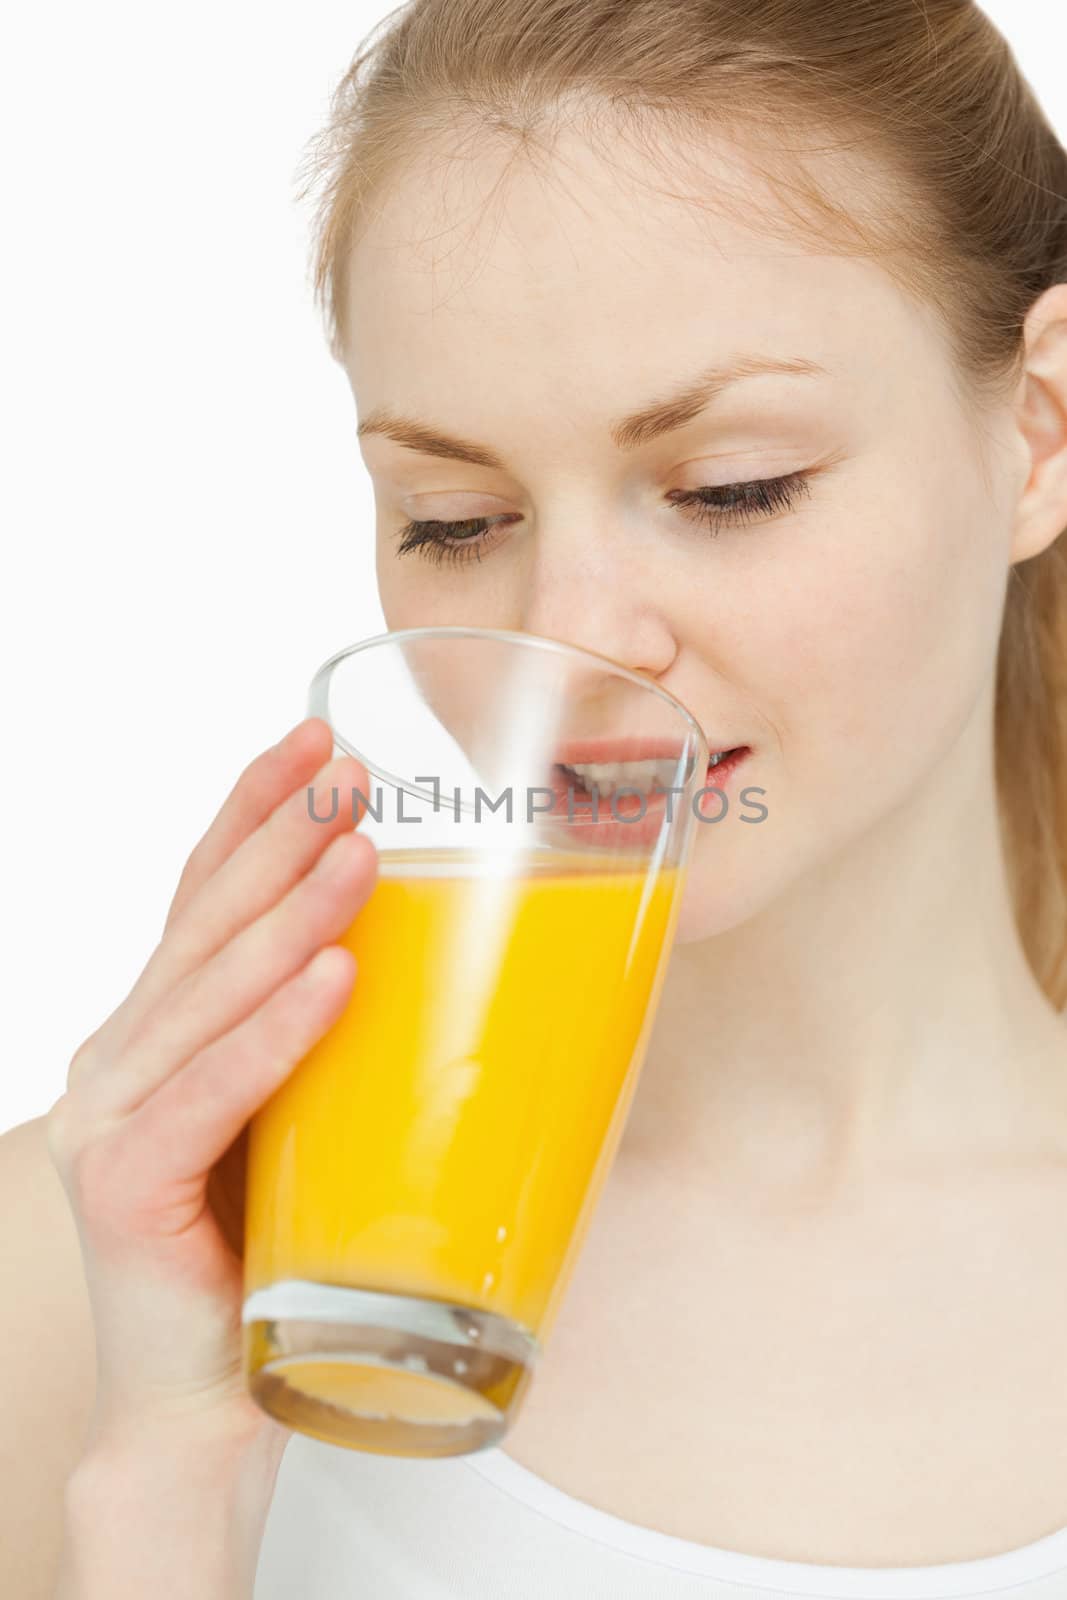 Woman drinking a glass of orange juice while looking at it against white background